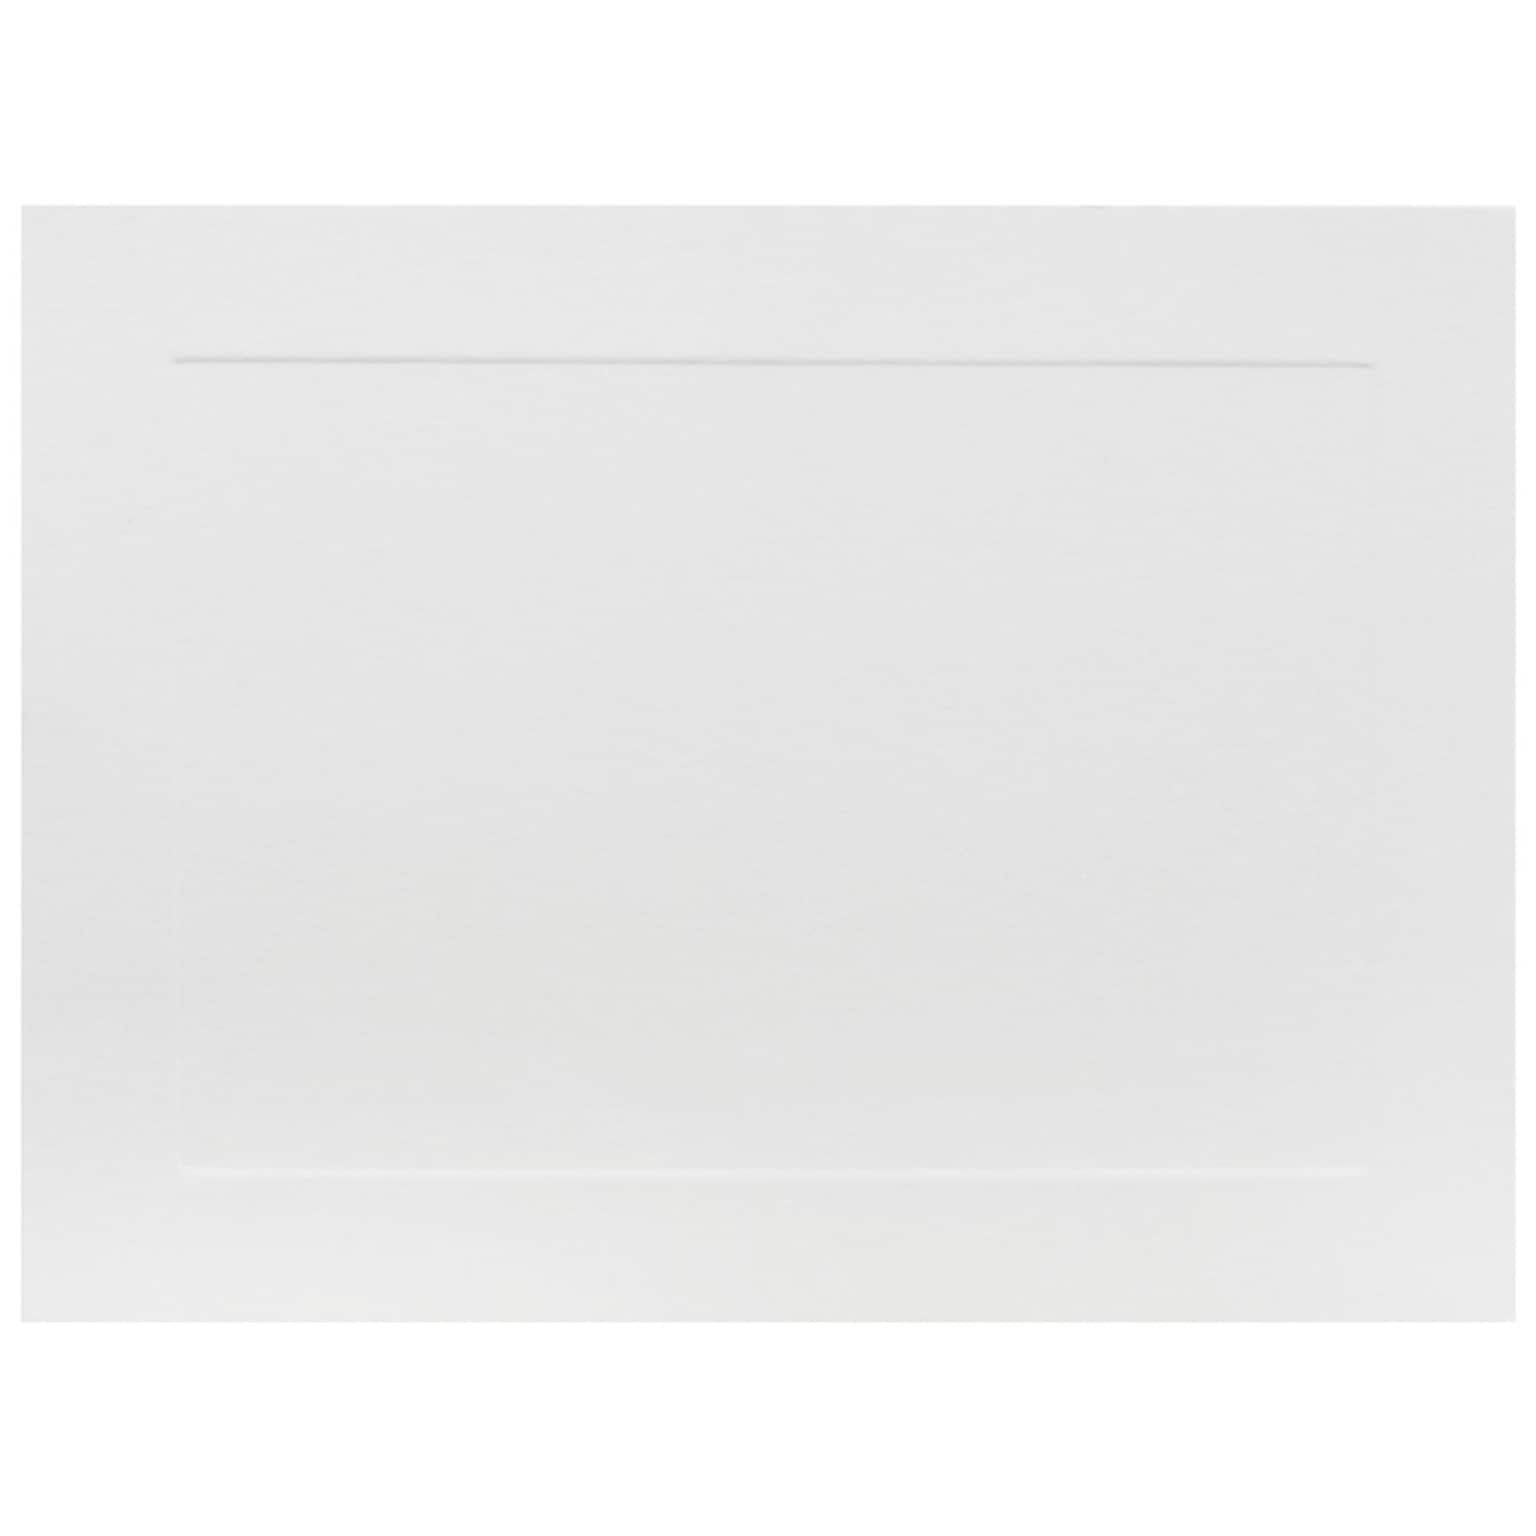 JAM Paper® Blank Note Cards, A6 size, 4 5/8 x 6 1/4, White Panel, 50/pack (1751001i)